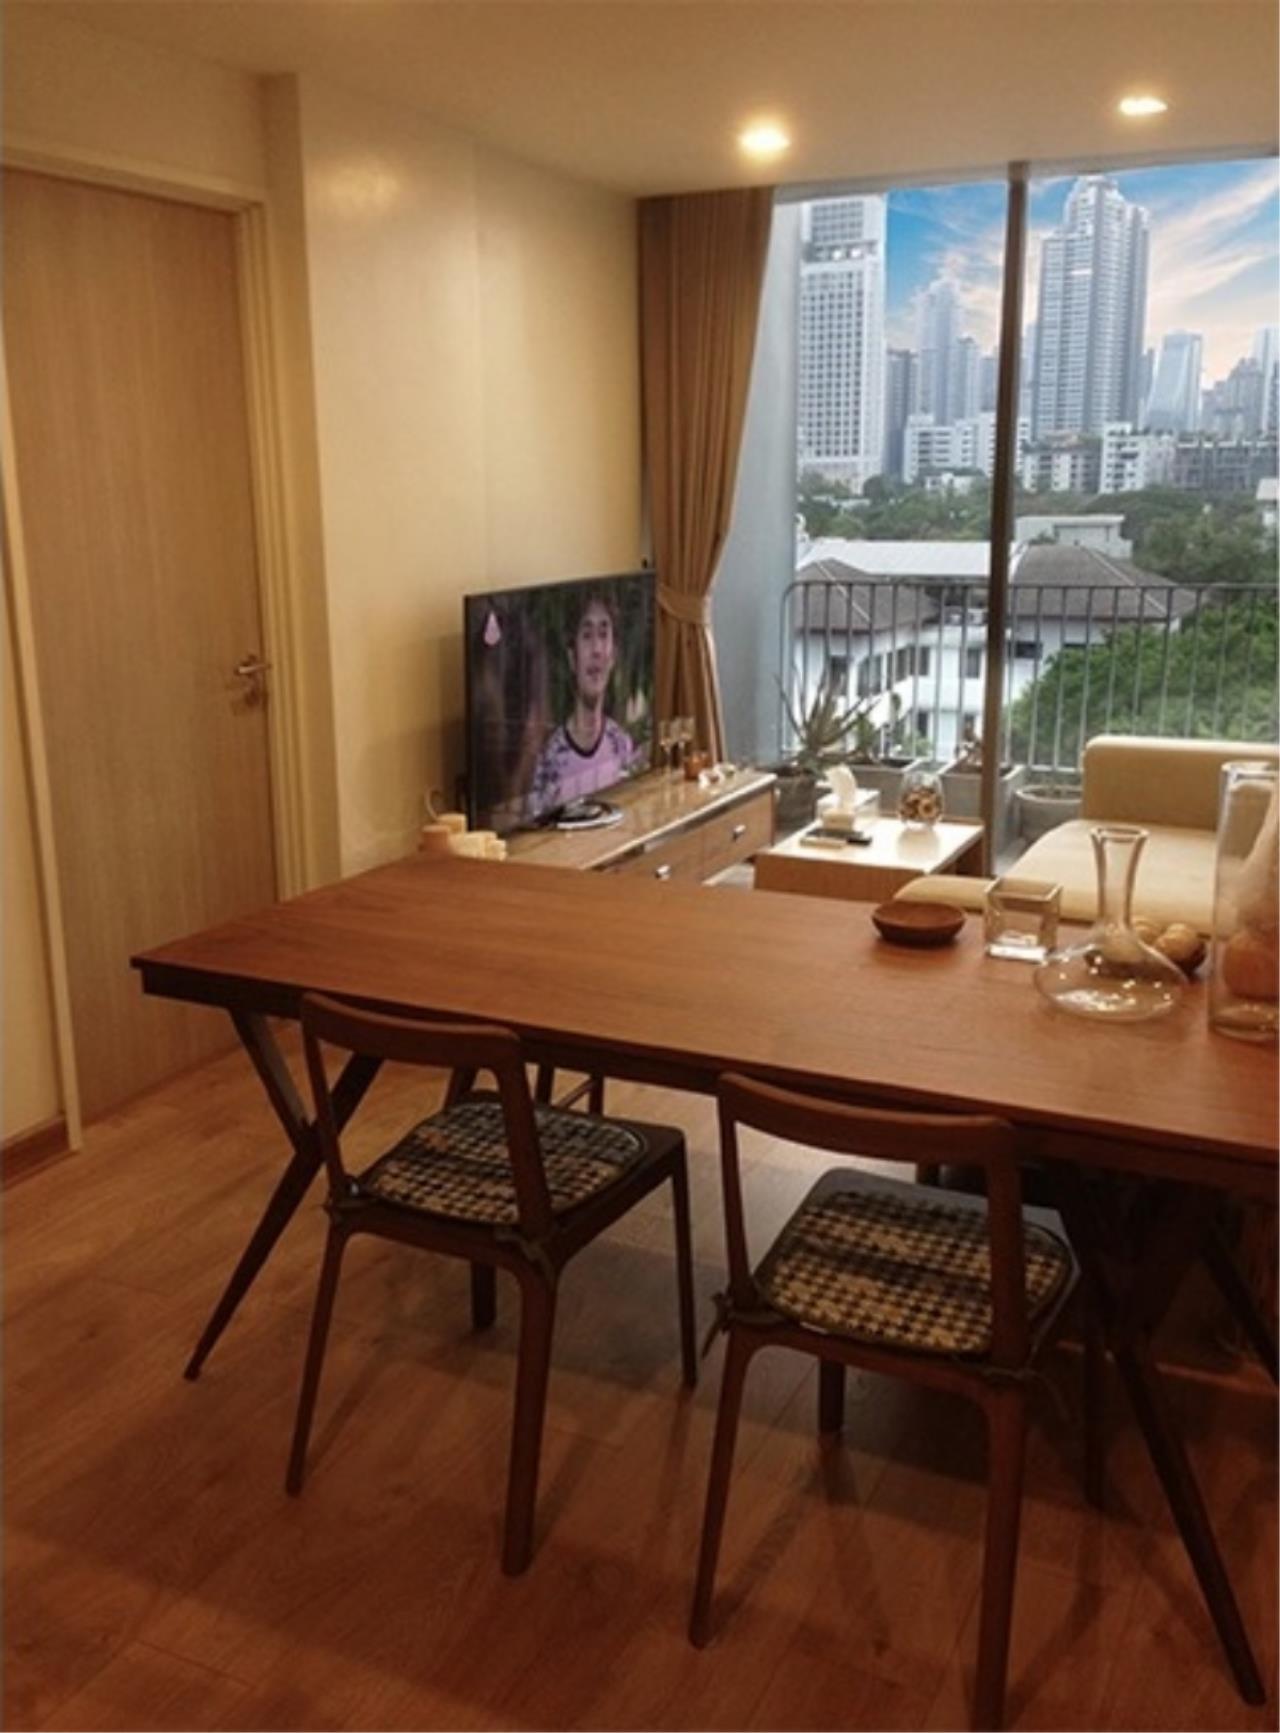 Century21 Skylux Agency's Downtown Forty Nine / Condo For Sale / 1 Bedroom / 48 SQM / BTS Phrom Phong / Bangkok 4